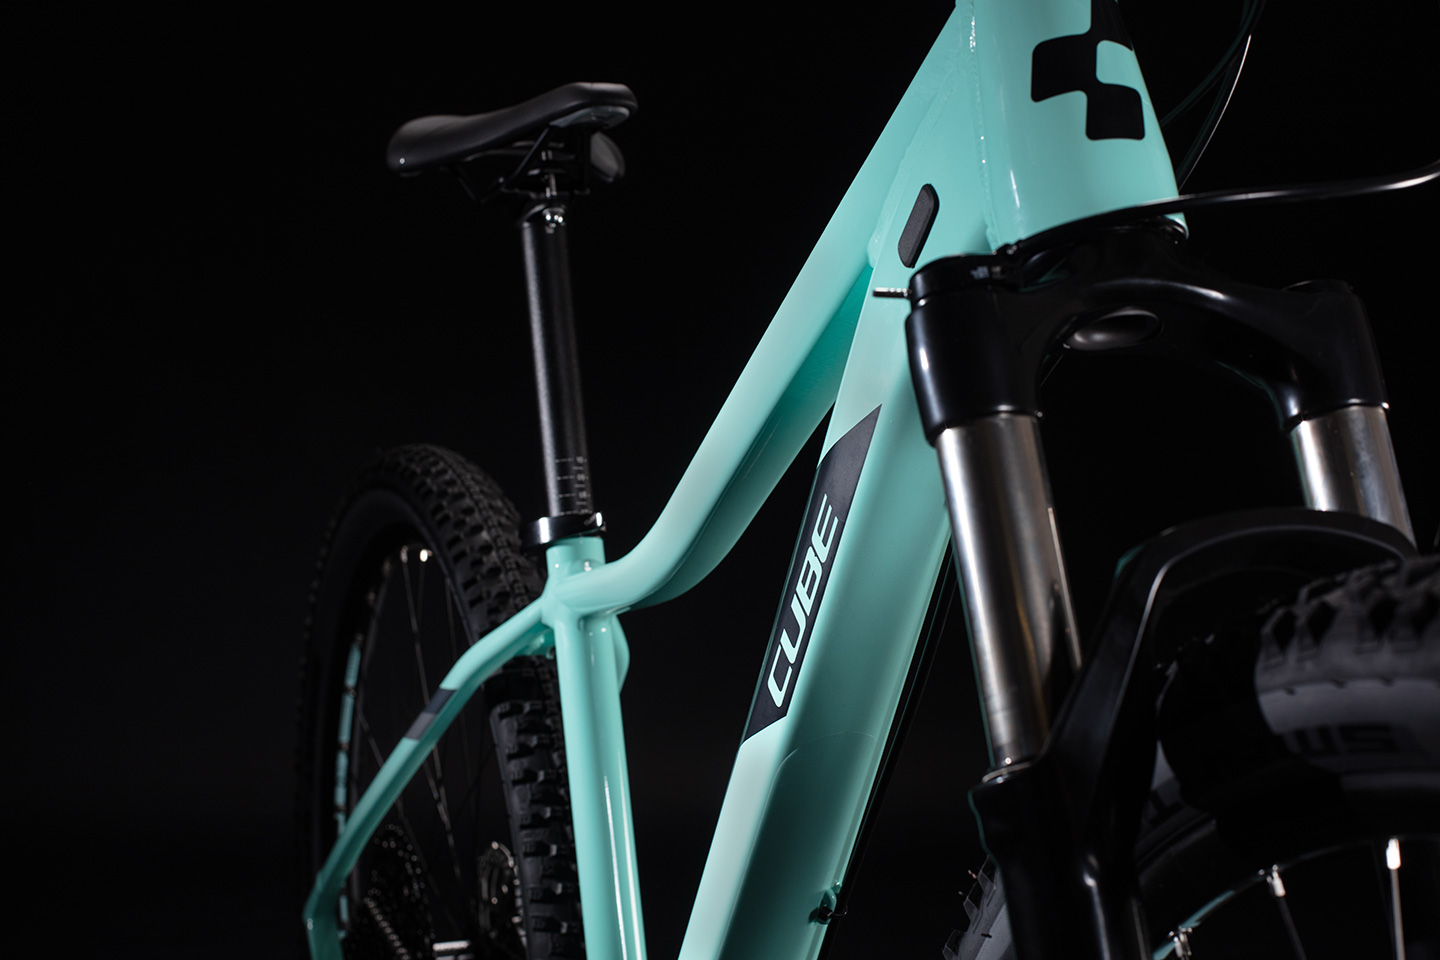 Cube ws. Cube access WS 27.5 (2020). Велосипед Cube access c:62 SL. Cube WS 2020. Cube WS 2019.